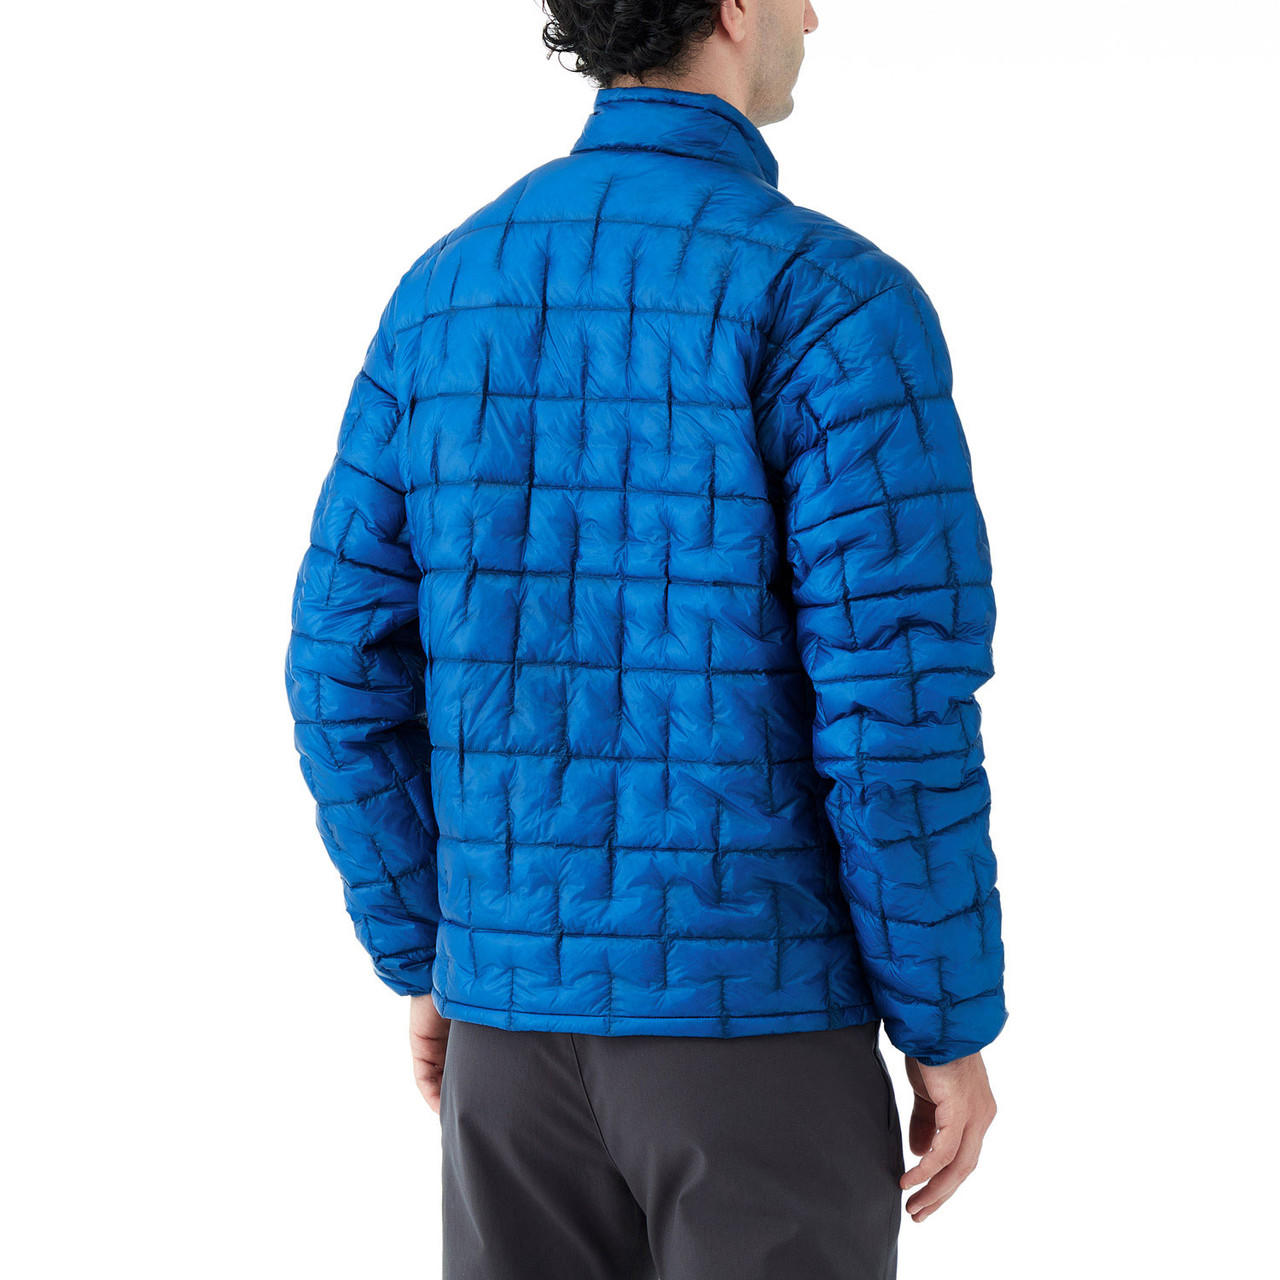 MontBell Plasma 1000 Down Jacket Reviews - Trailspace